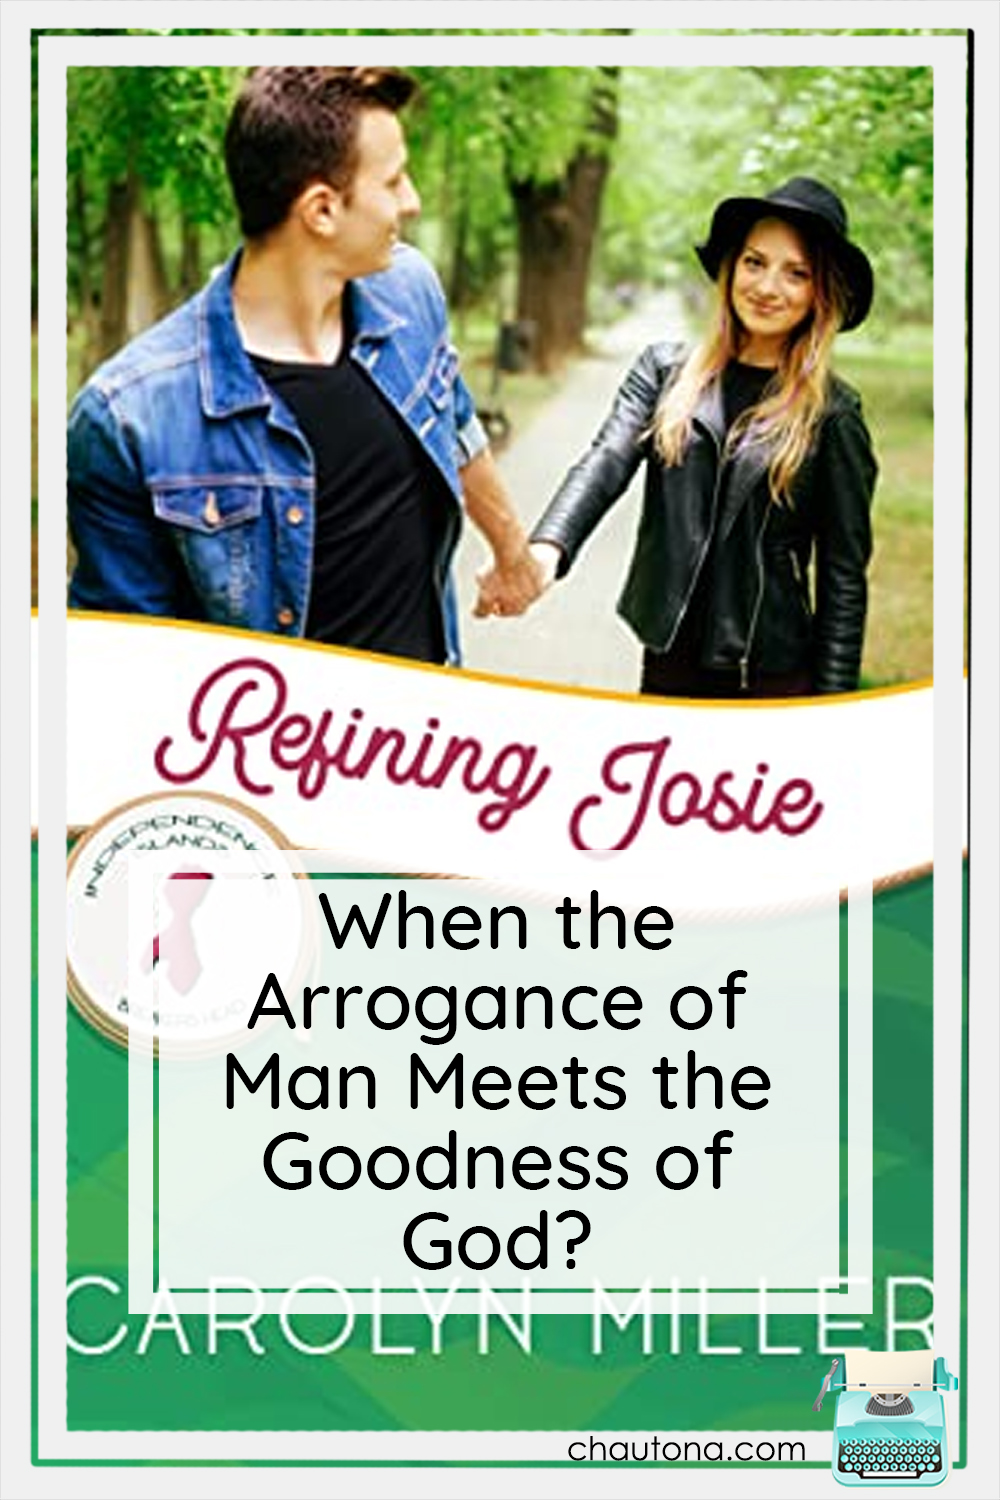 Refining Josie, the last book in the Independence Islands series, is here, & the authors are talking about mistakes and misunderstandings. via @chautonahavig